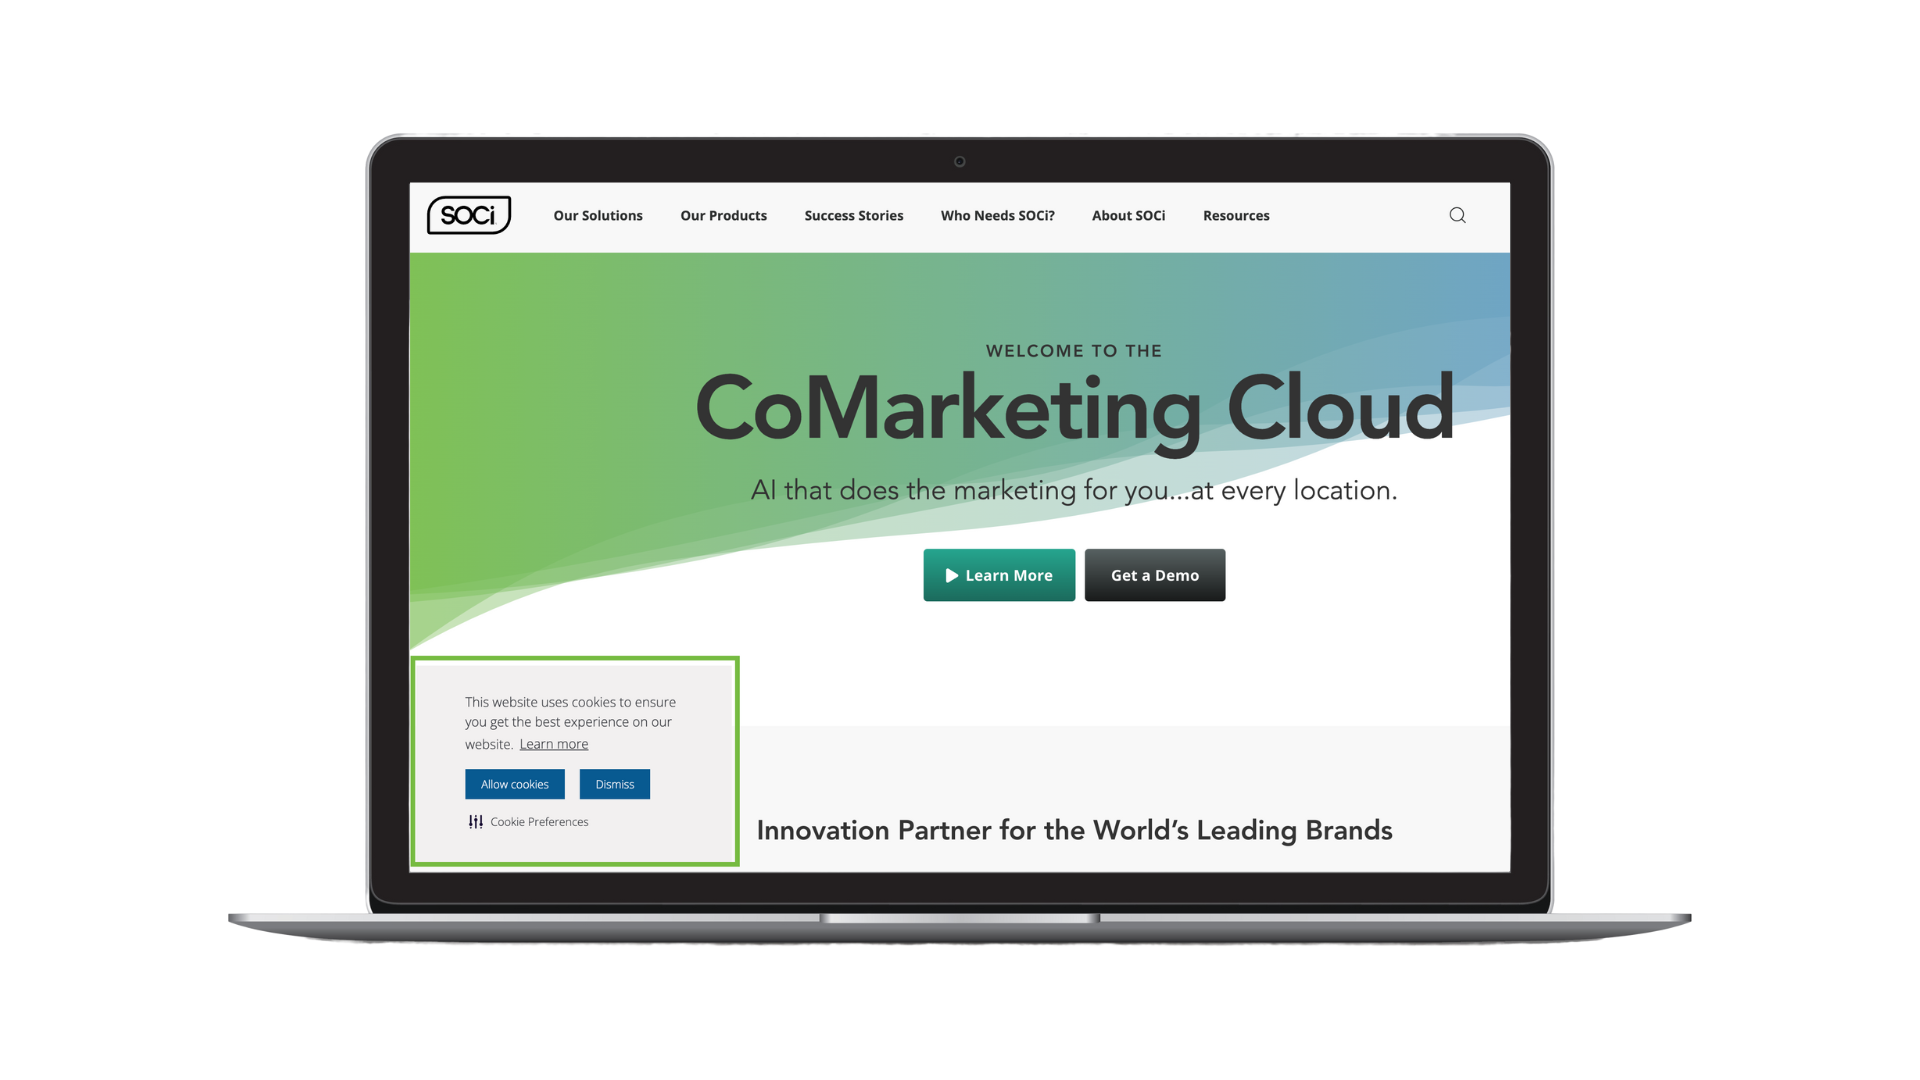 SOCi's home page with CoMarketing Cloud in black text at the center with a blue, green, and white background, and a opt-in or opt-out of cookies option in the bottom left corner with a green rectangle around it. 